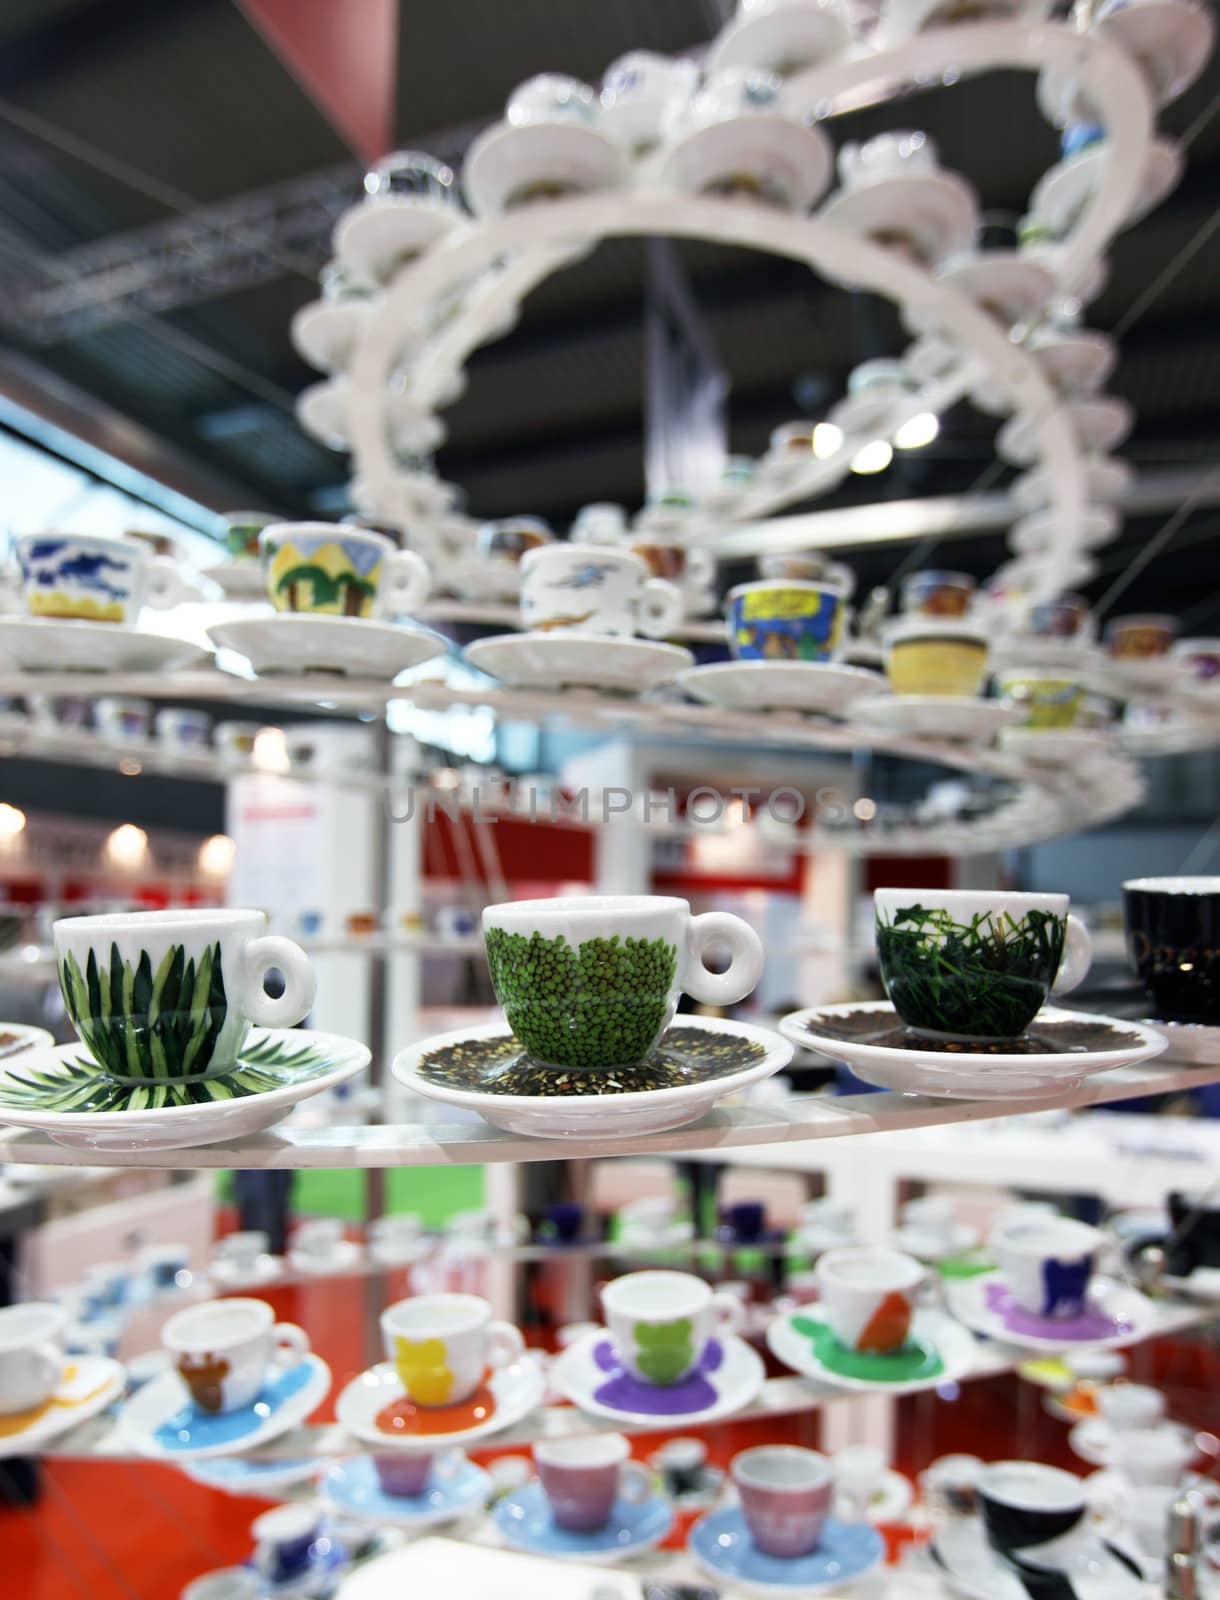 Illy Caffè coffee cups installation in exhibition at Tuttofood, Milano World Food Exhibition